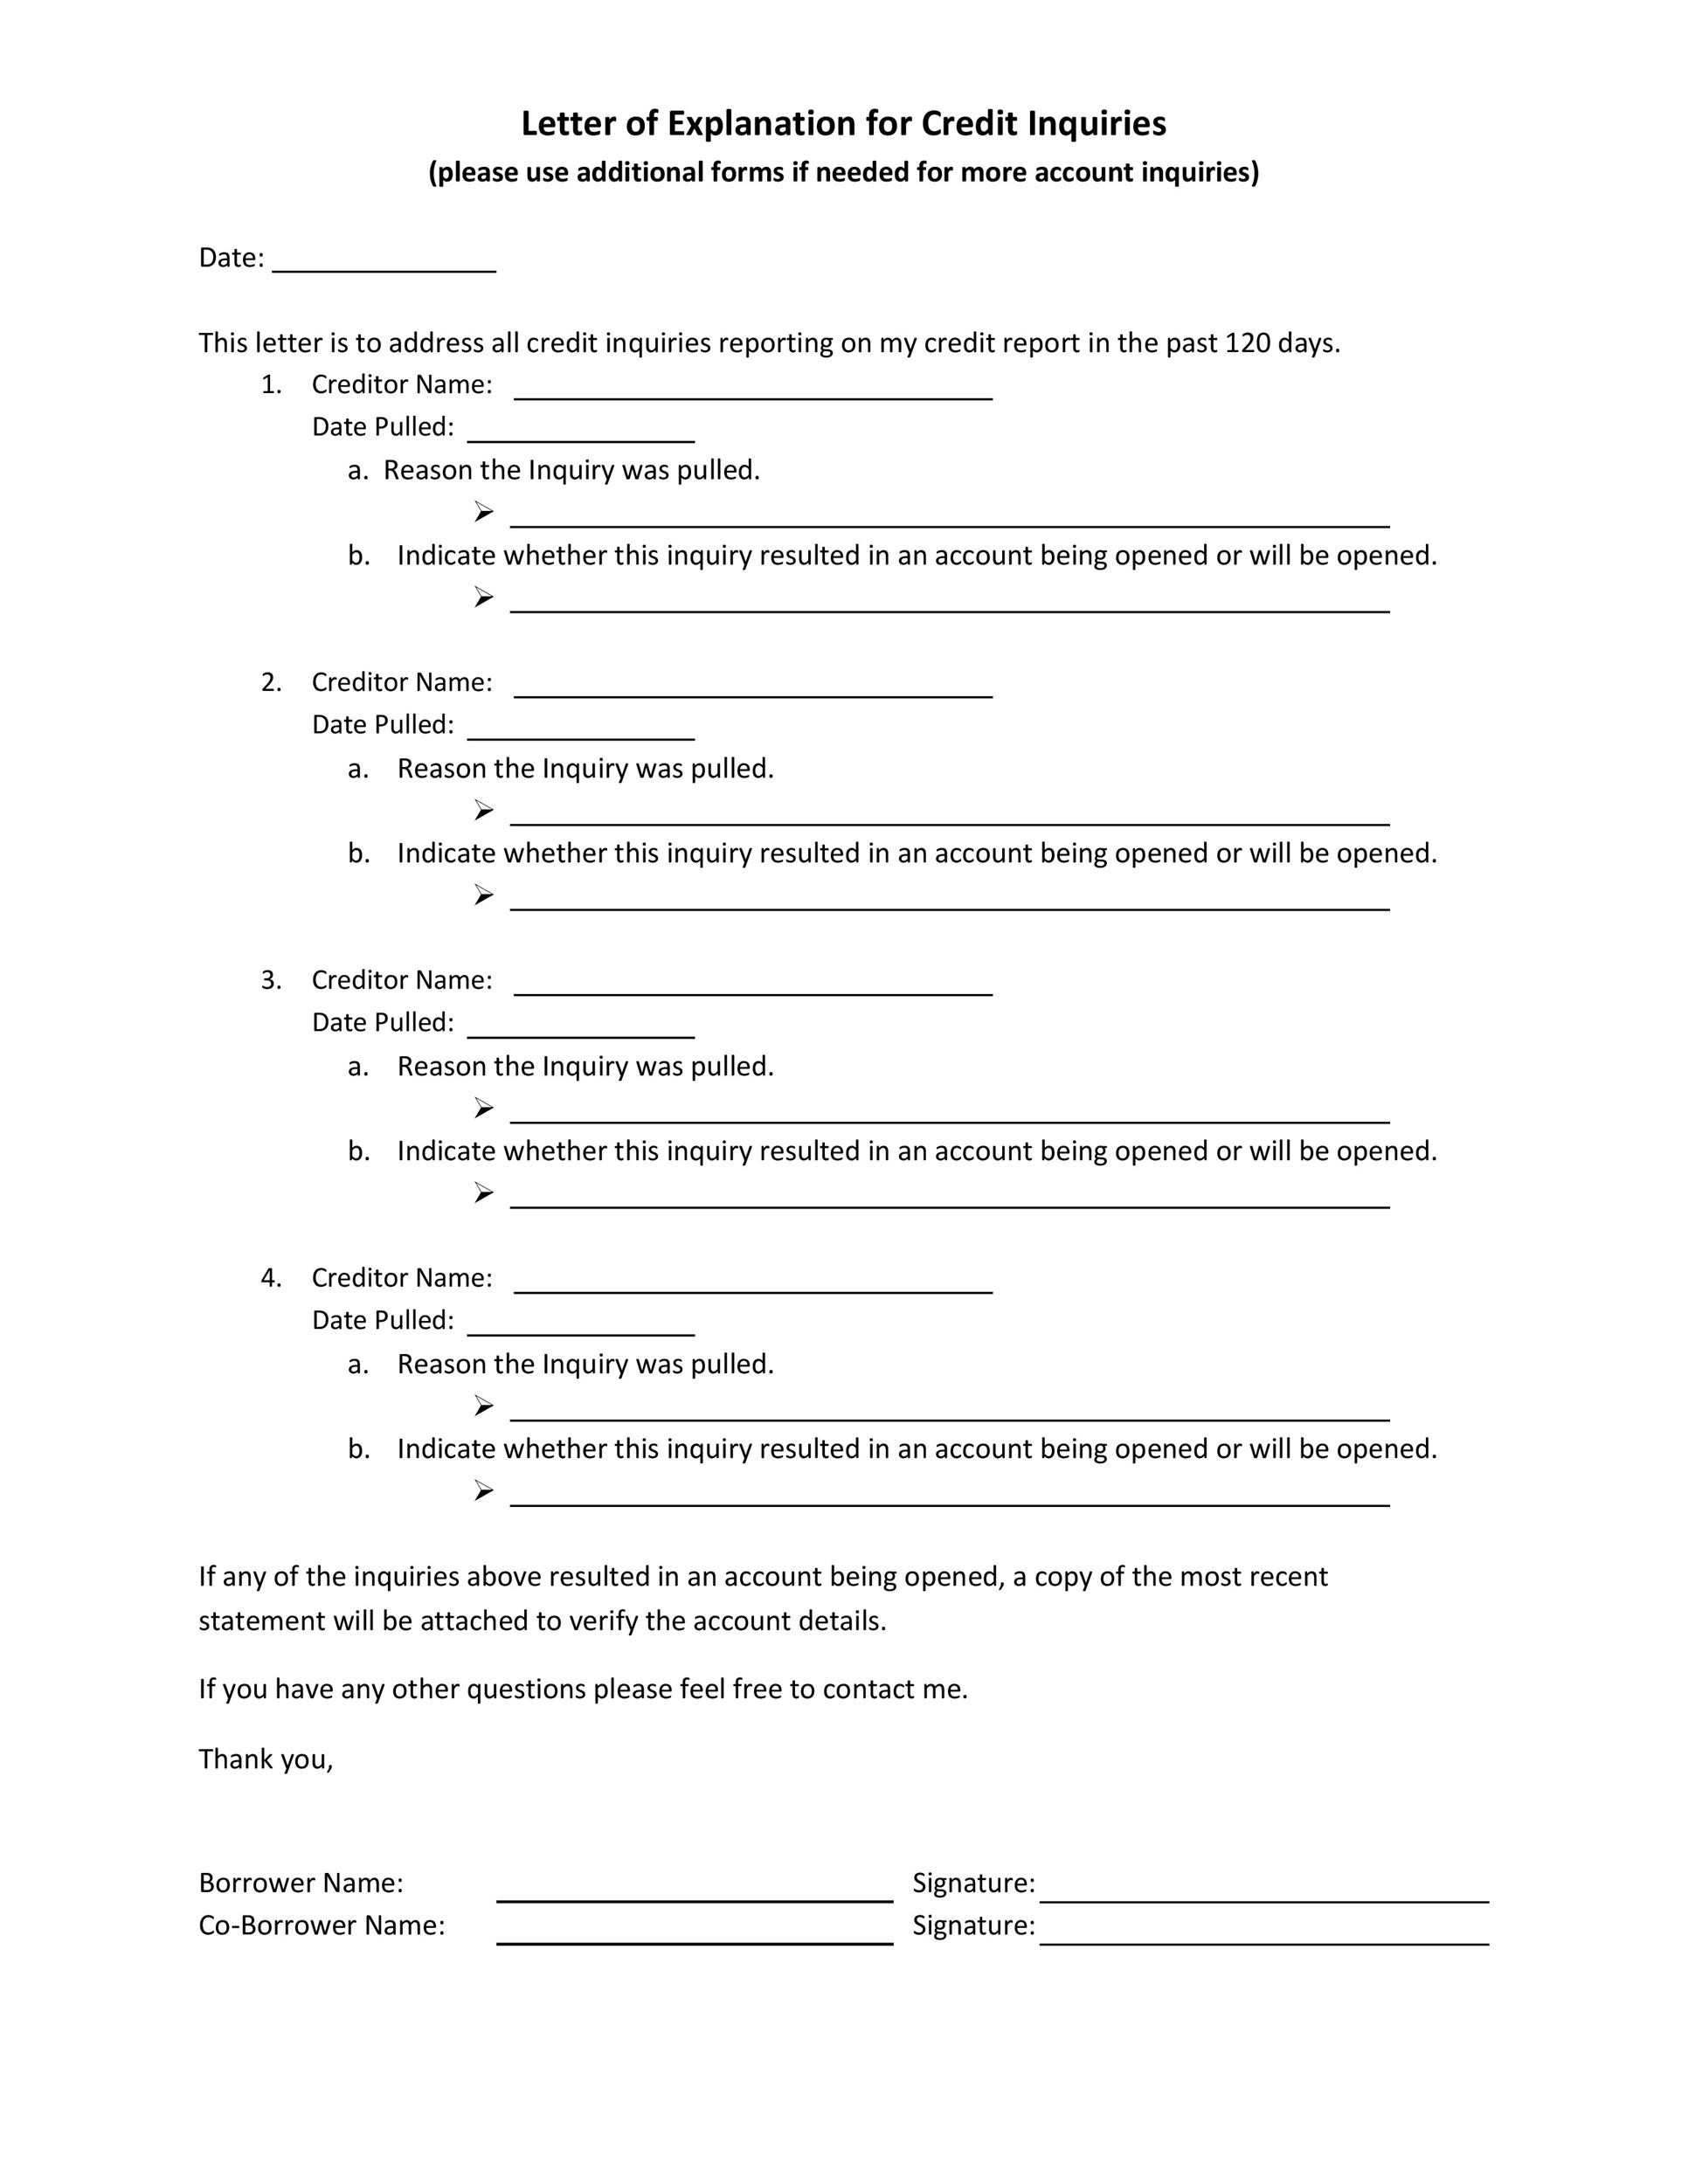 48-letters-of-explanation-templates-mortgage-derogatory-credit